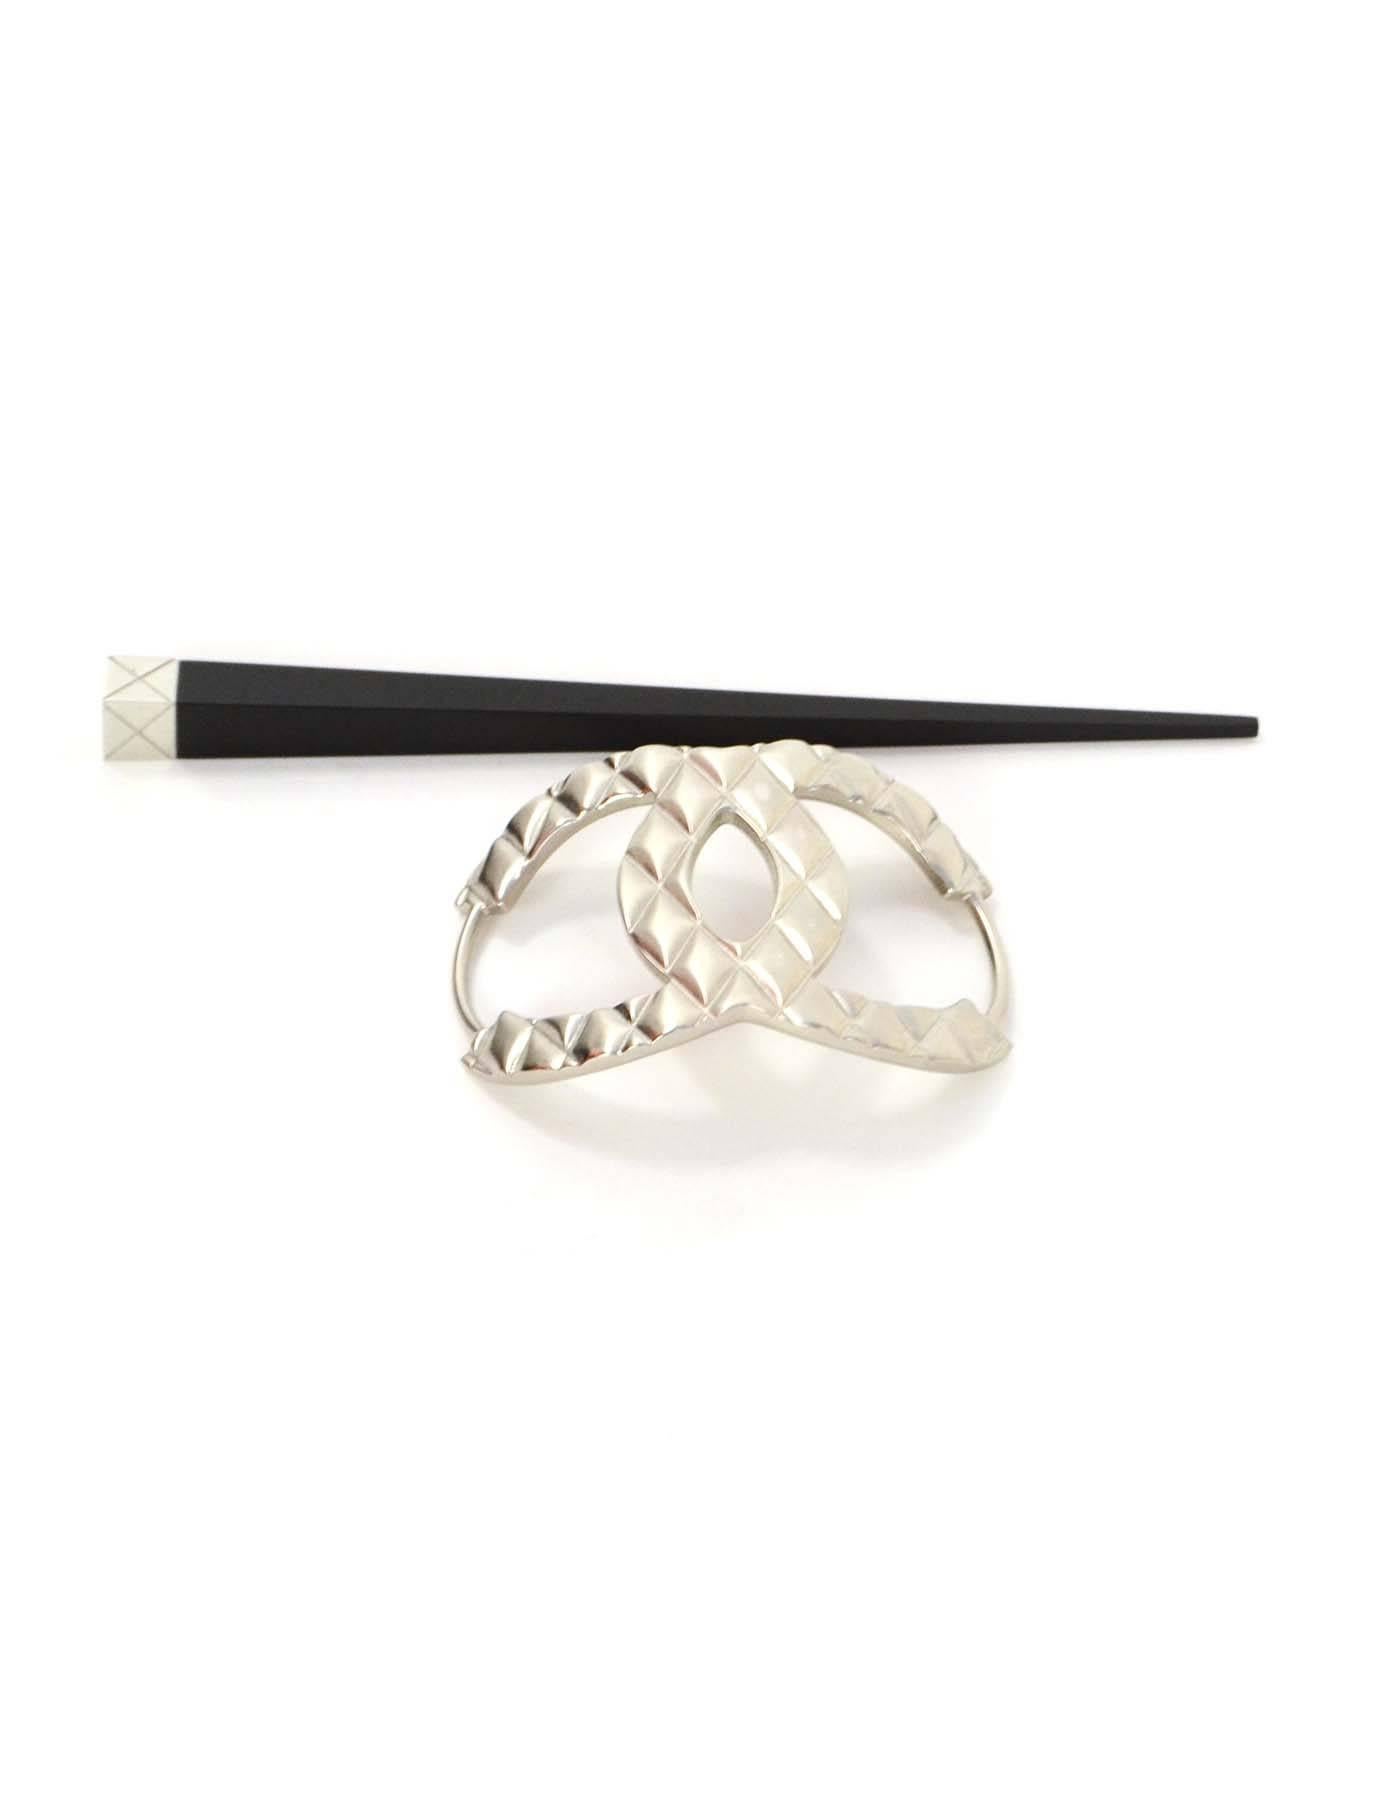 Chanel '15 Quilted Silver CC Hair Pin 
Features quilted silvertone block at end of black resin needle
Made In: Italy
Year of Production: 2015
Color: Black and brushed silvertone
Materials: Resin and metal
Closure/Opening: None
Stamp: B15 CC